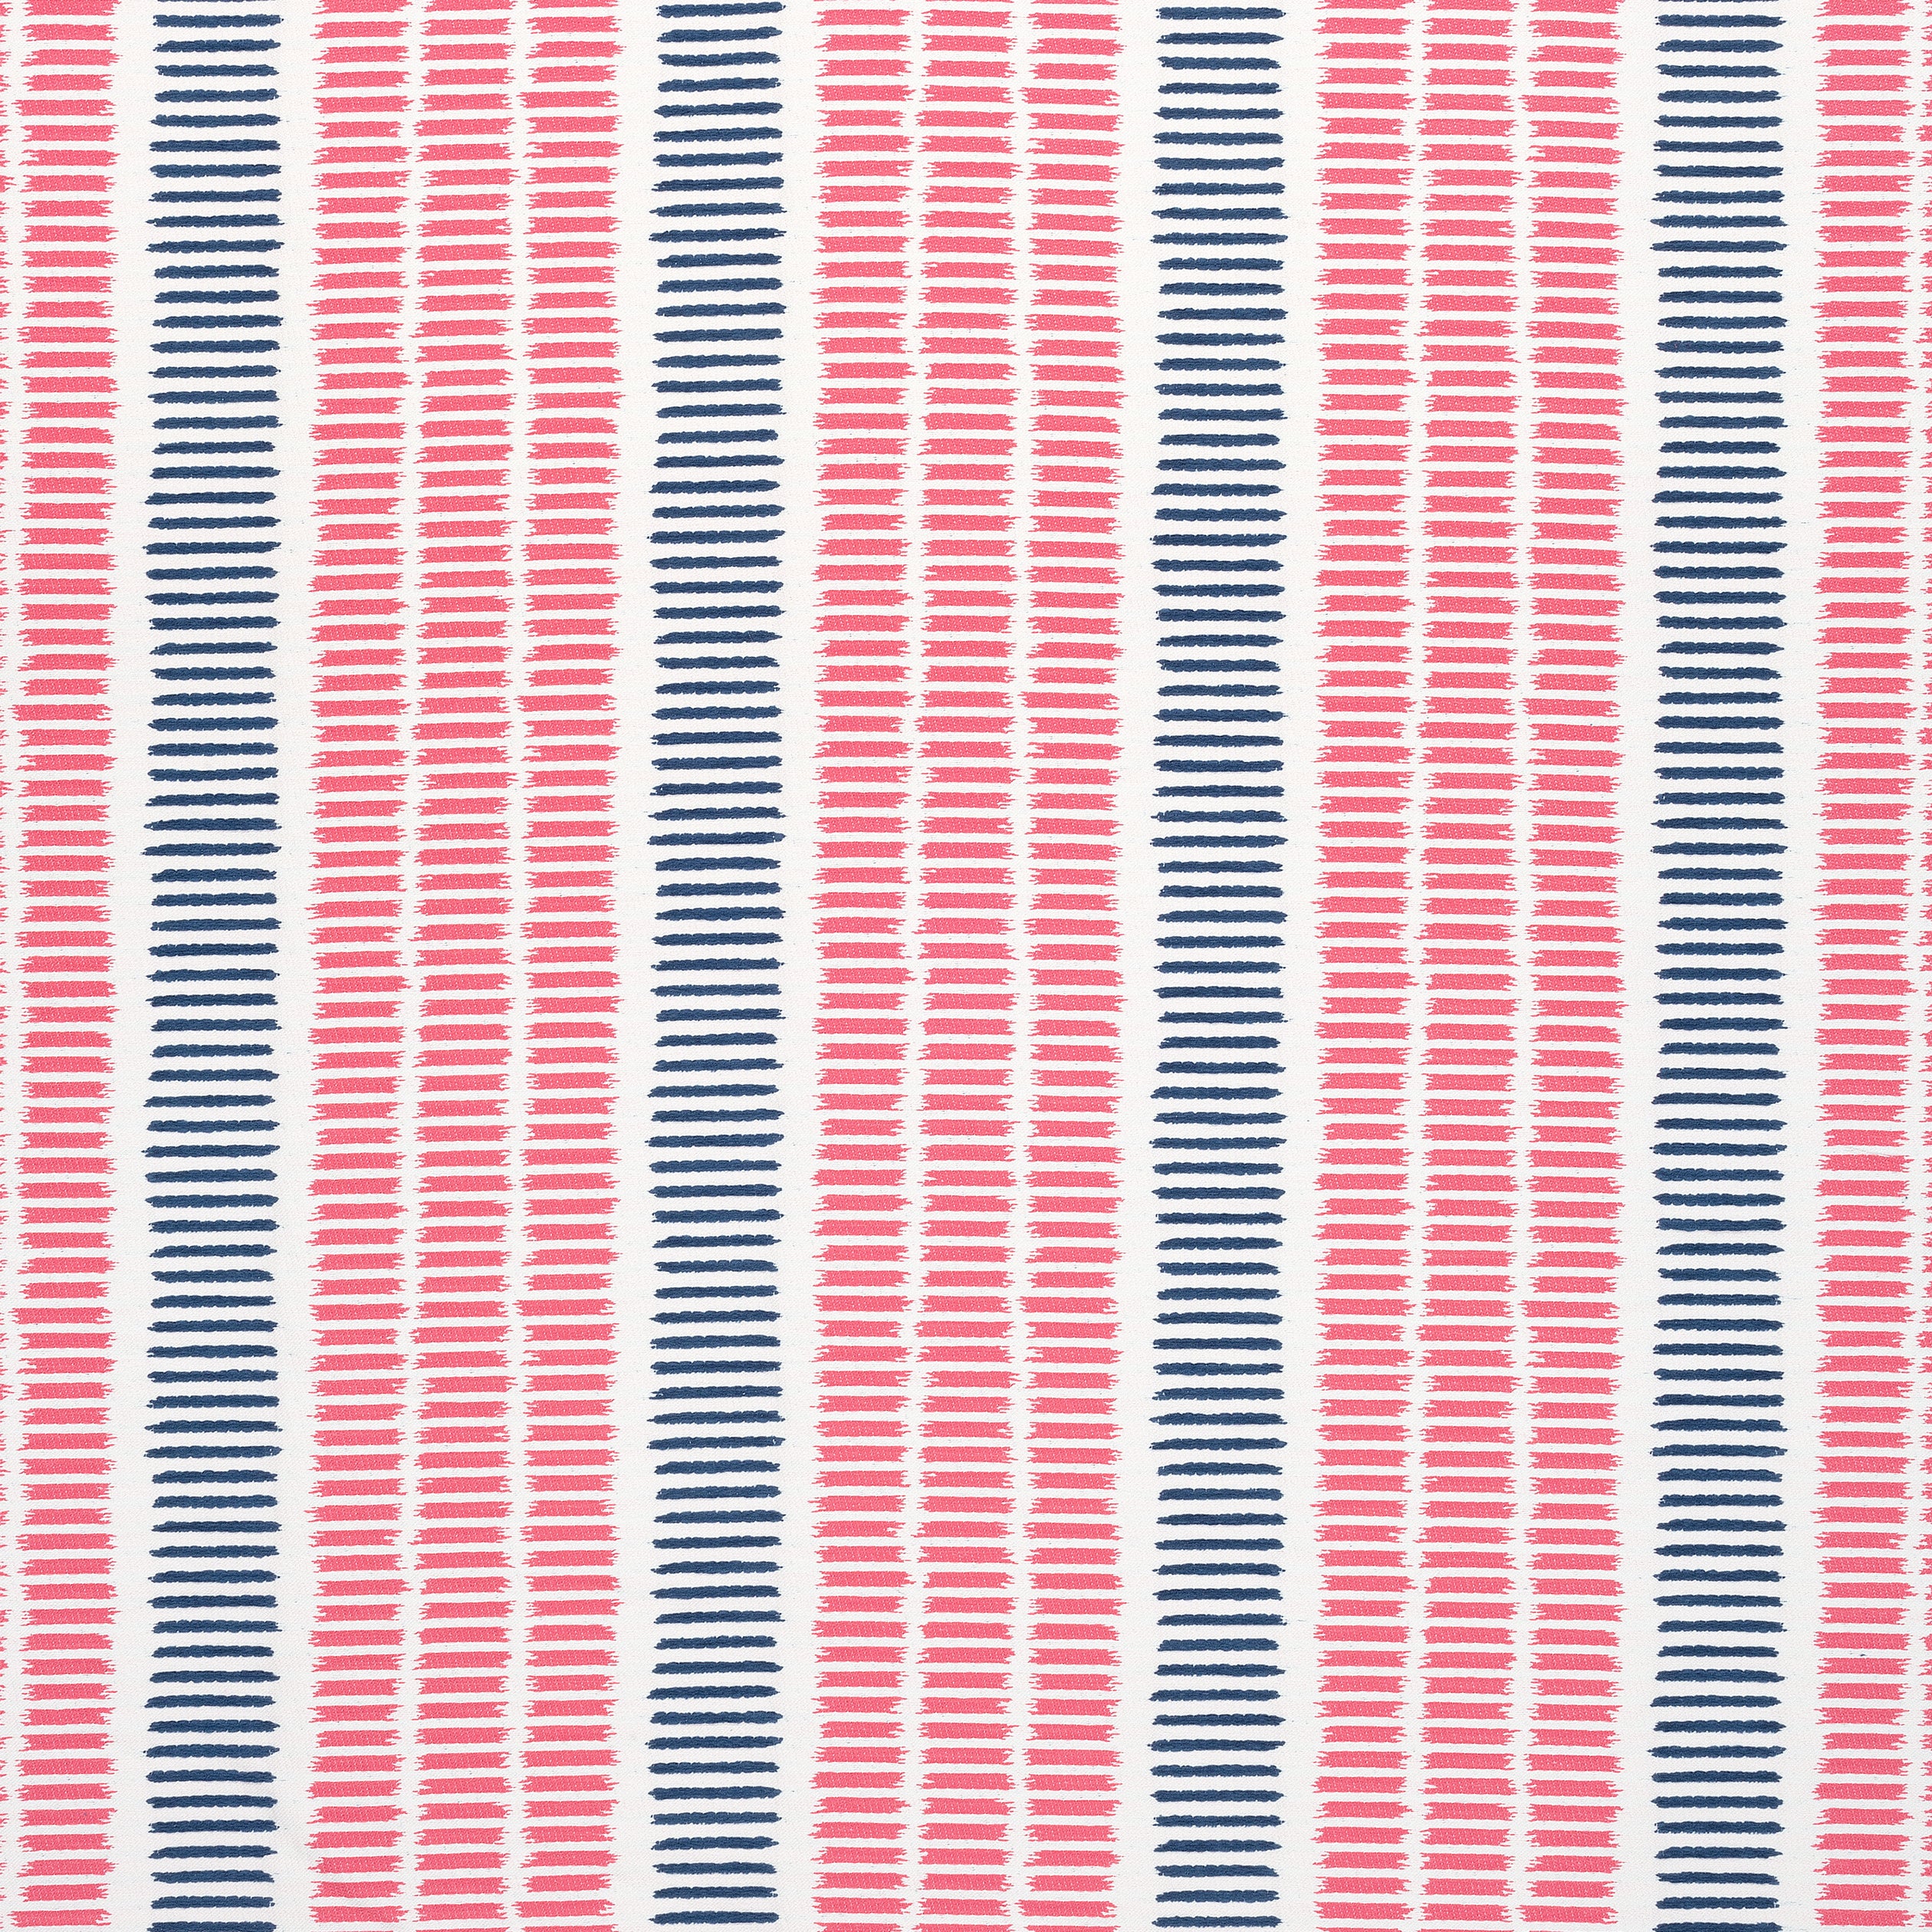 Topsail Stripe fabric in peony and marine color - pattern number W73513 - by Thibaut in the Landmark collection